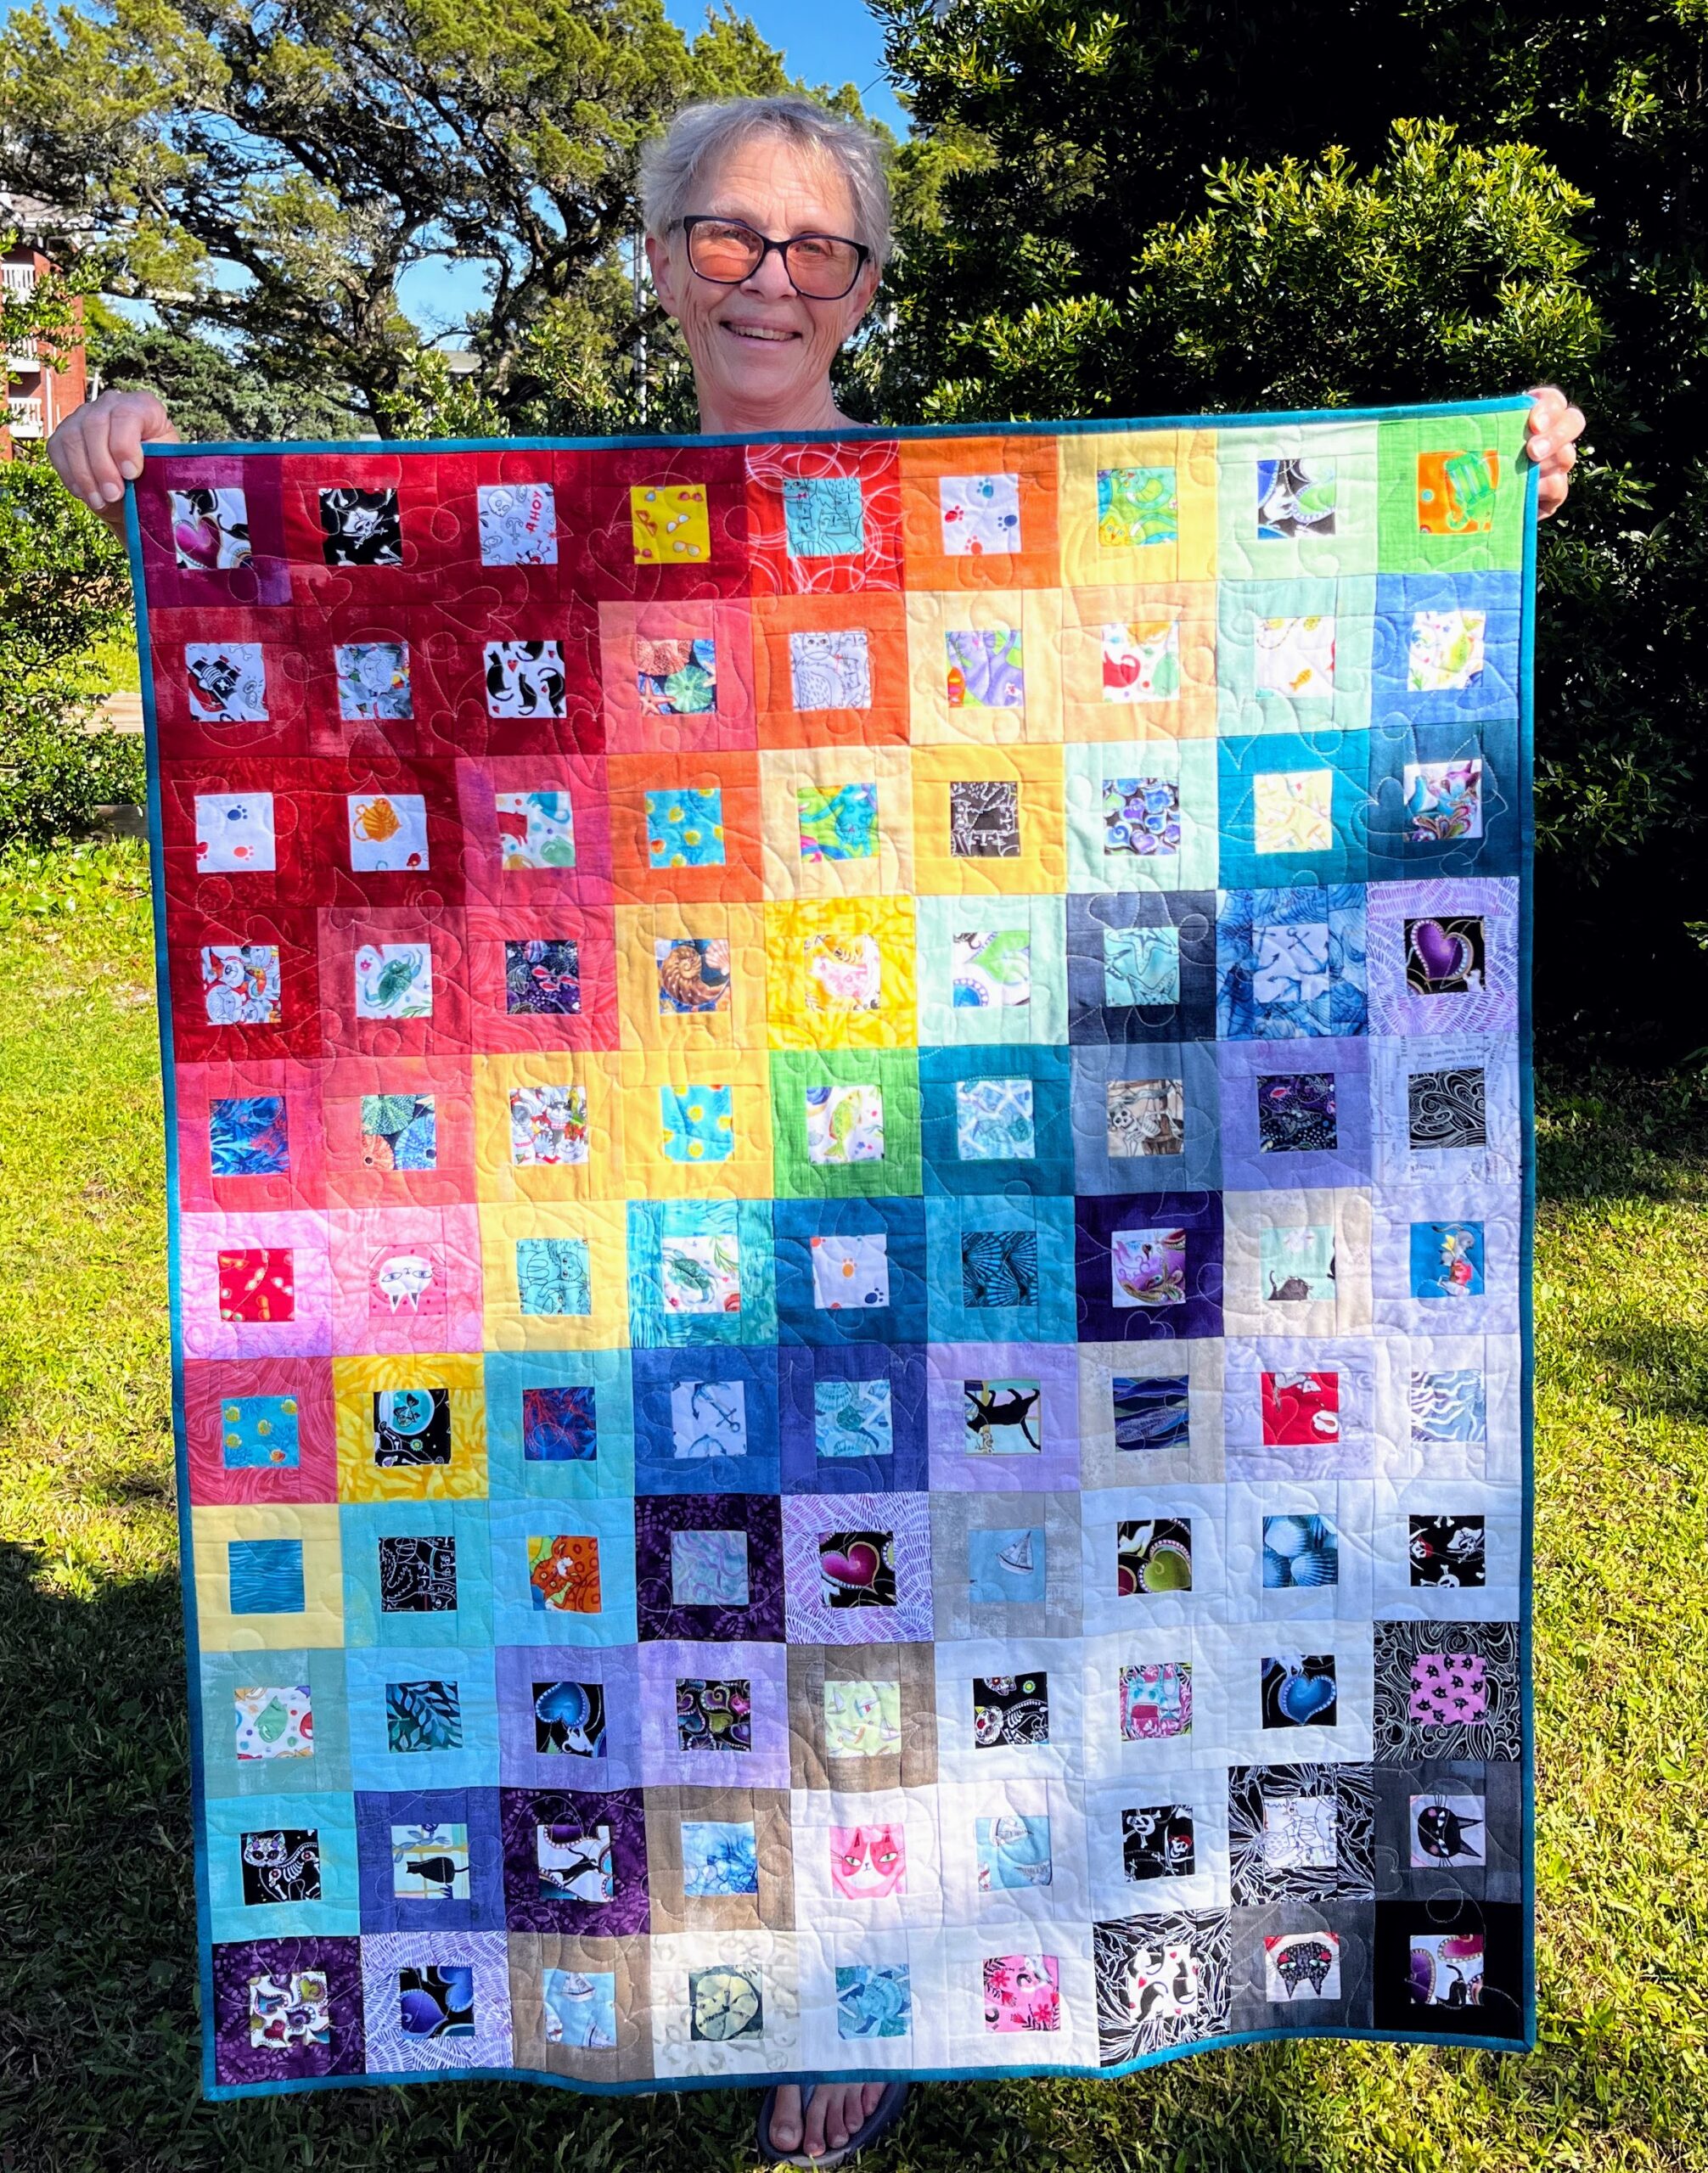 Elaine Spray of Taos, New Mexico, was the lucky winner of the smaller of the quilts made and donated by Nora Blythe. Congratulations!